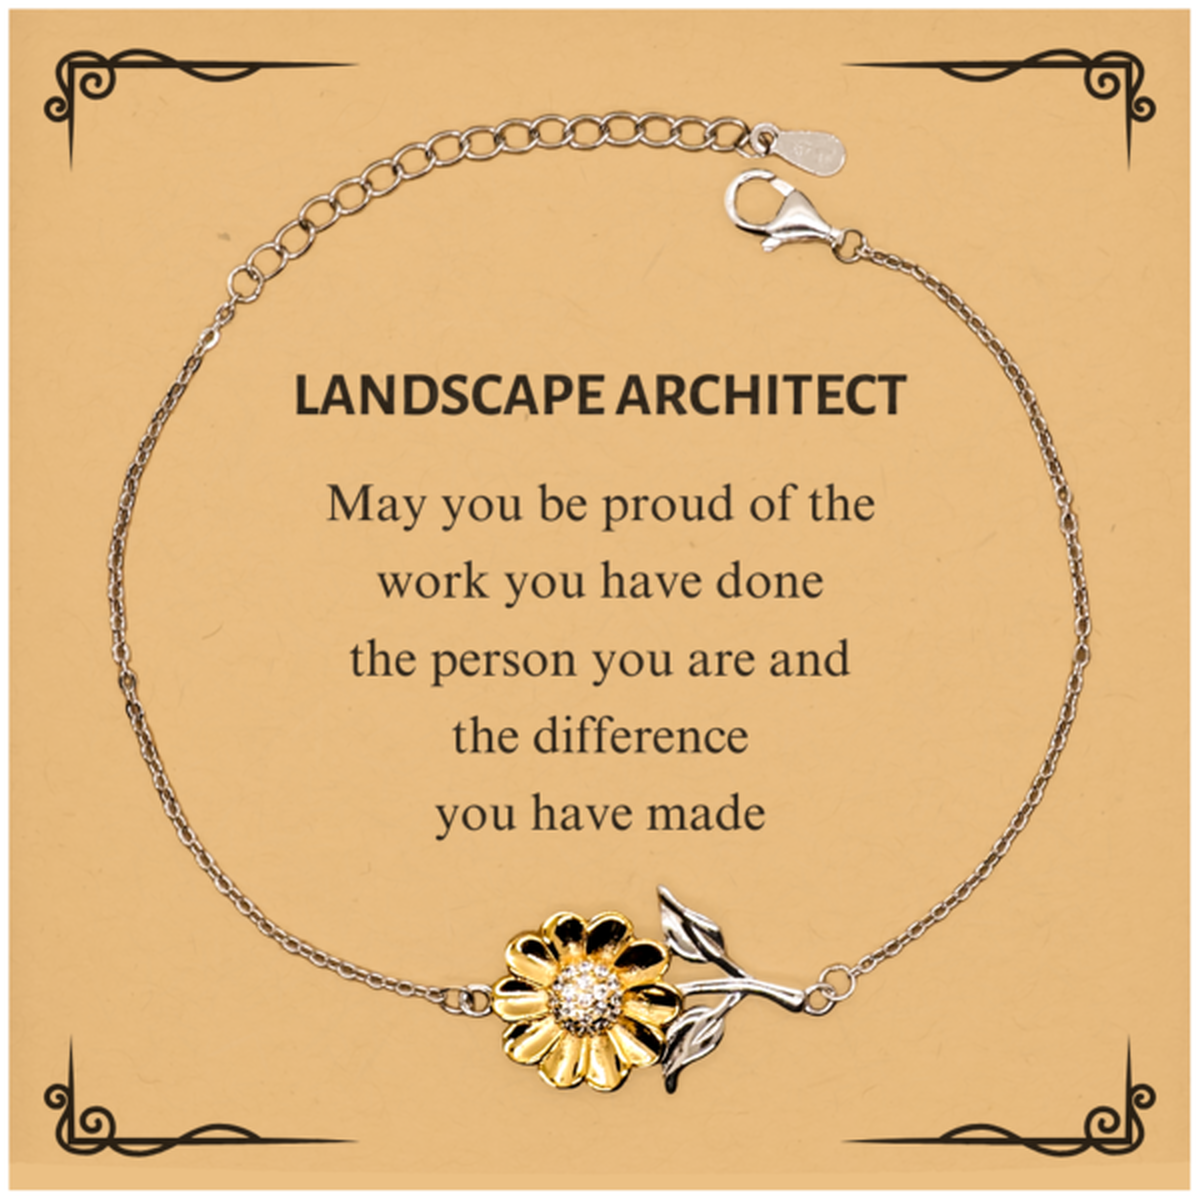 Landscape Architect May you be proud of the work you have done, Retirement Landscape Architect Sunflower Bracelet for Colleague Appreciation Gifts Amazing for Landscape Architect